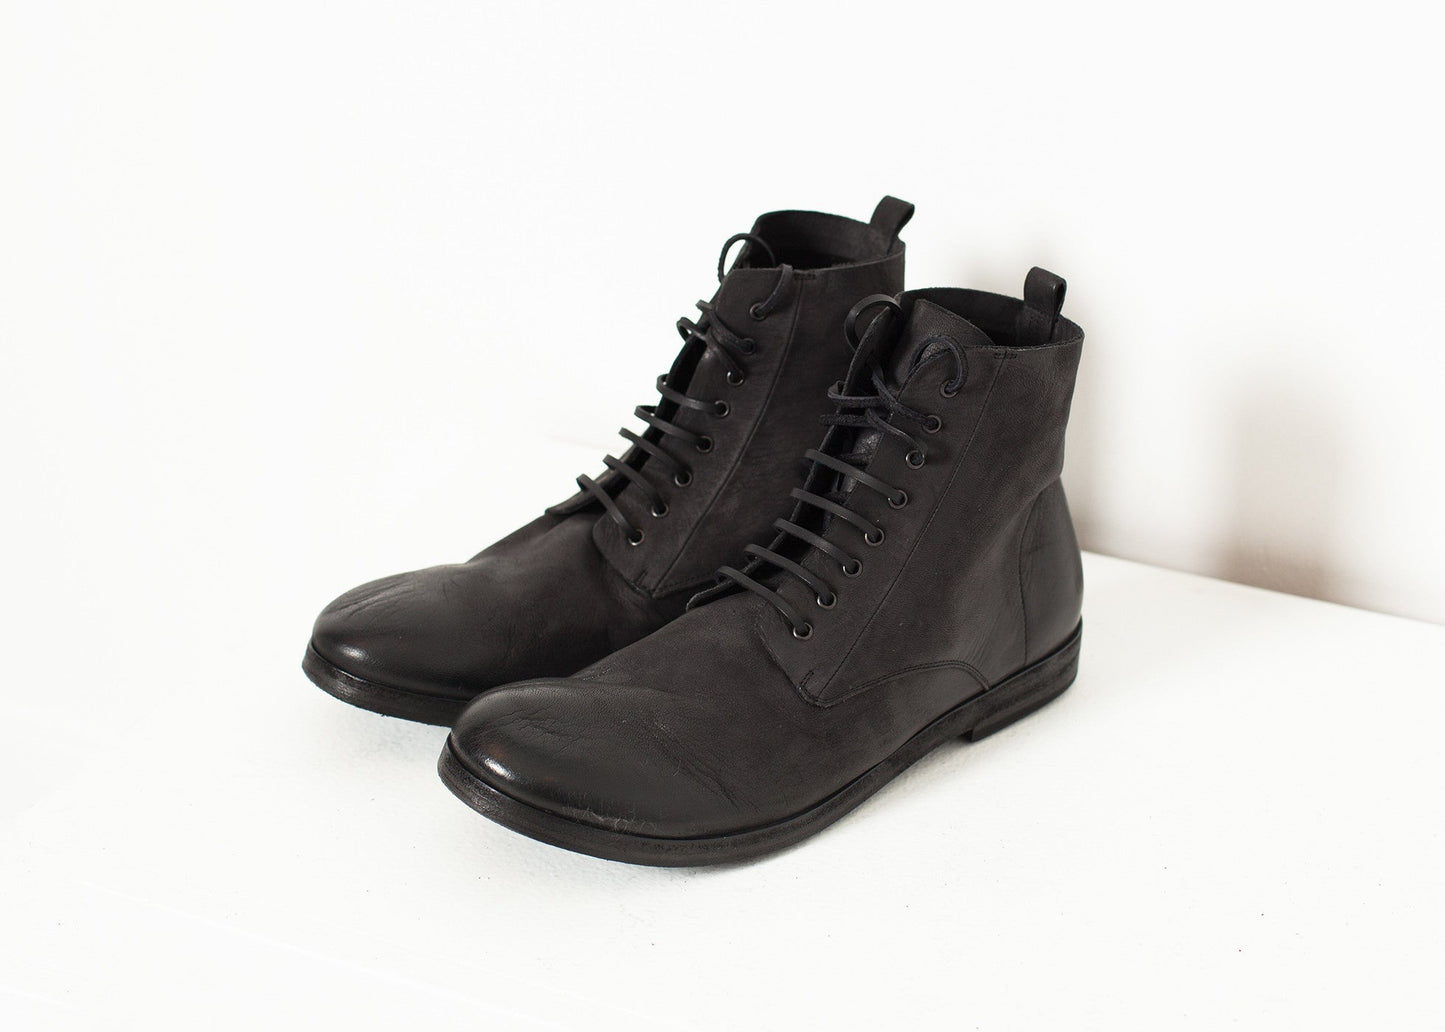 Combat Ankle Boot in Black